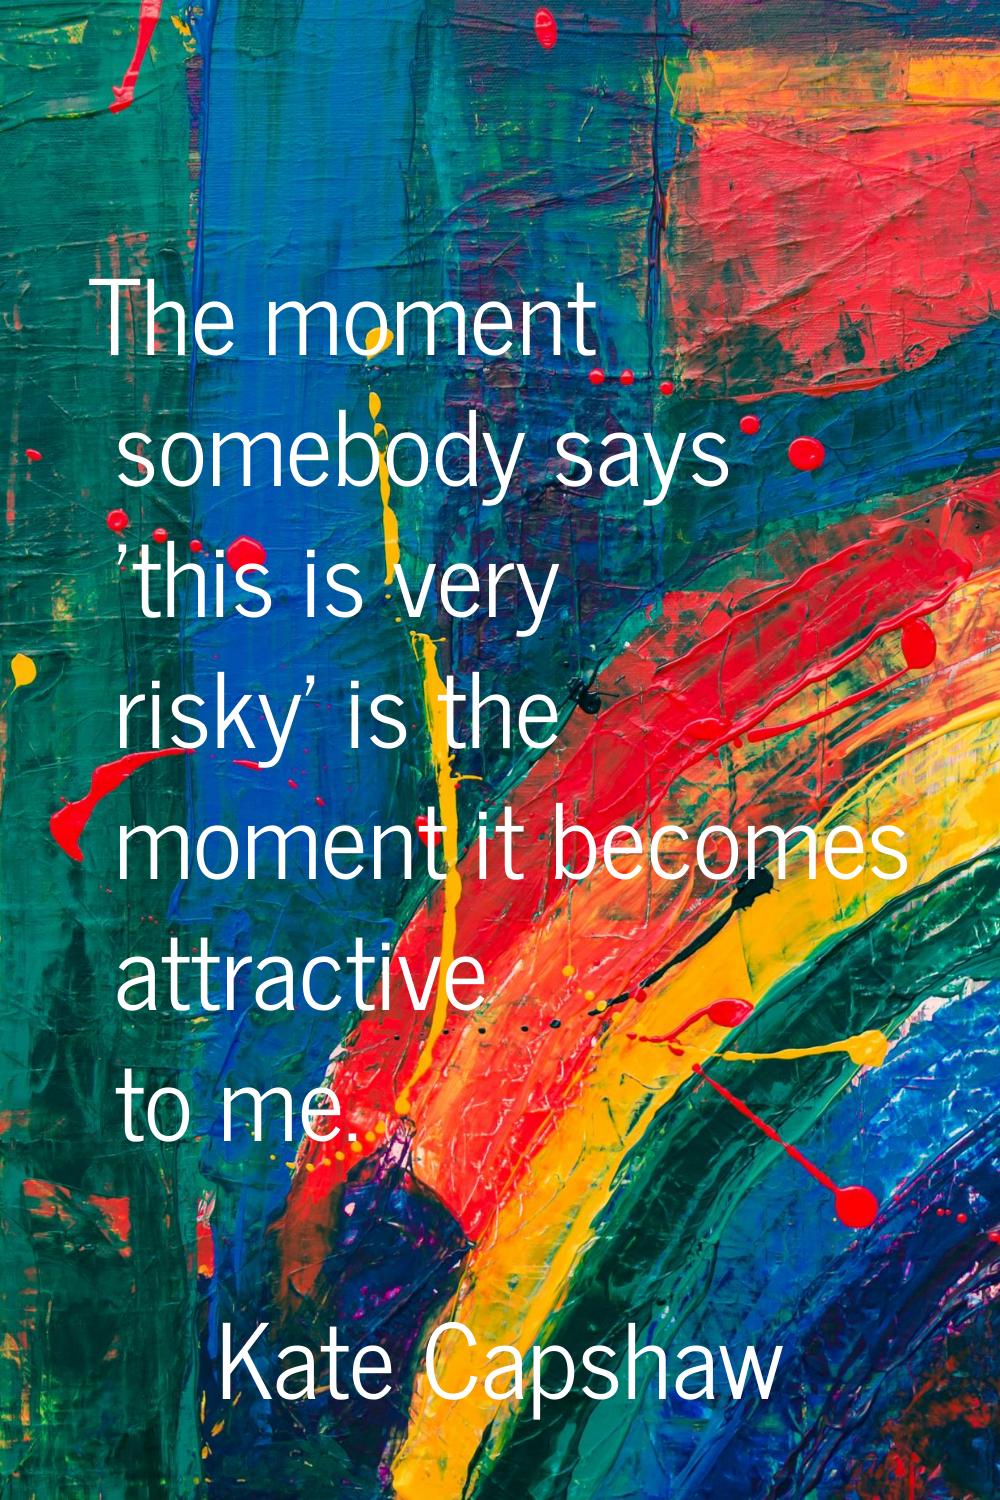 The moment somebody says 'this is very risky' is the moment it becomes attractive to me.